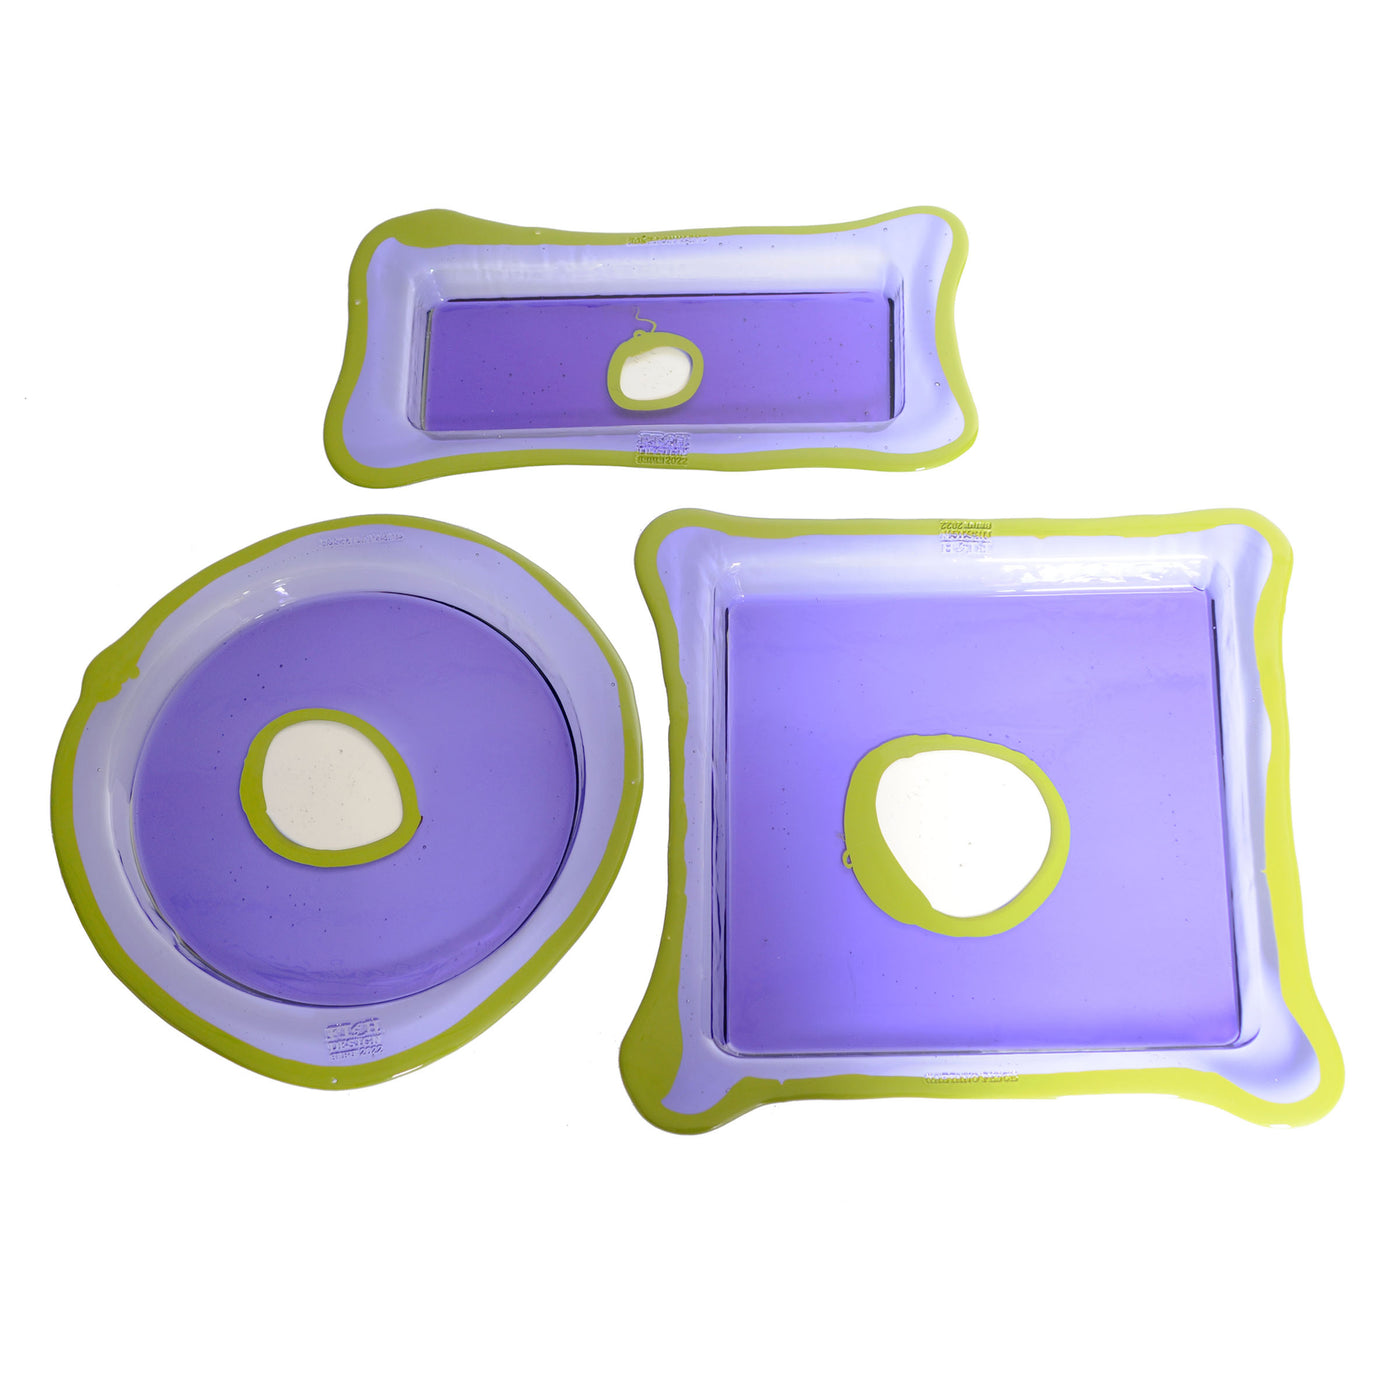 Resin Round Tray TRY-TRAY Purple by Gaetano Pesce for Fish Design 03